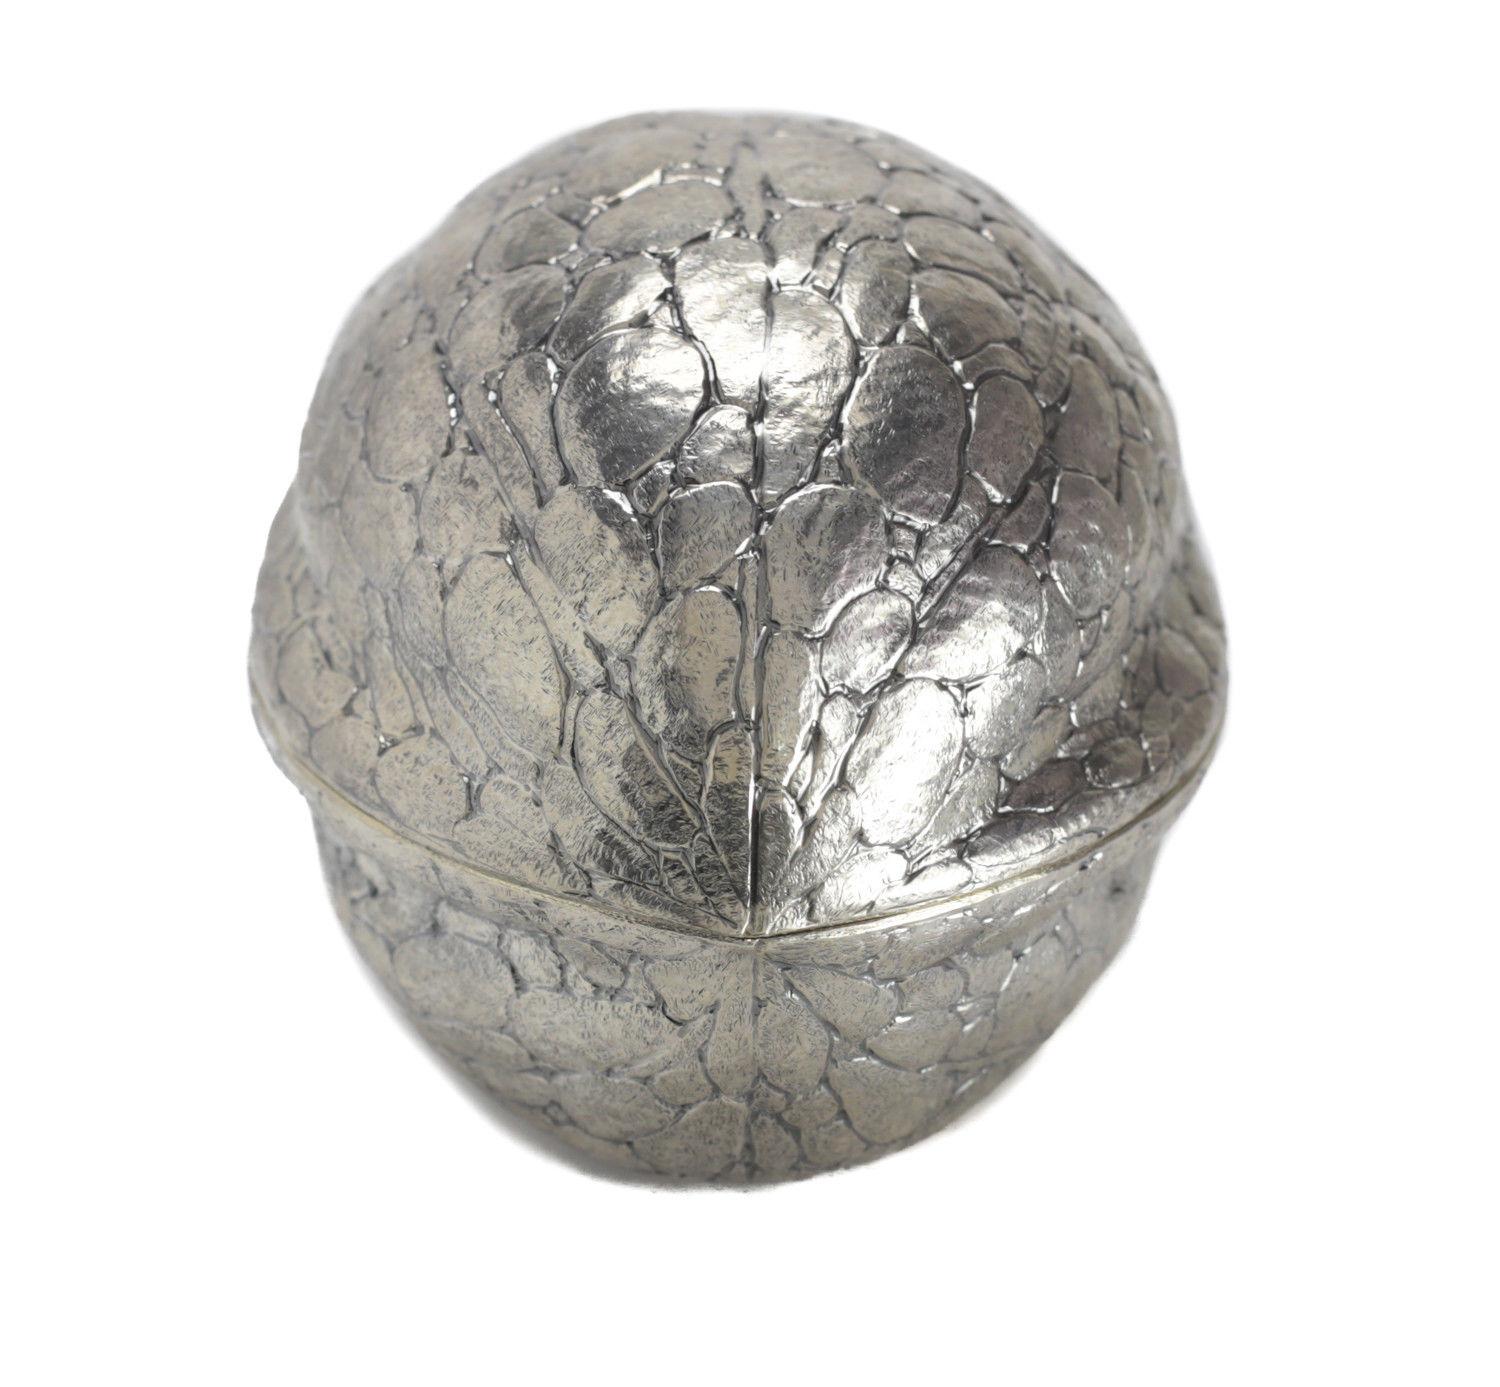 An elegant Buccellati Pradella Ilario sterling silver box, circa 1940. Beautifully hand chased to resemble a figural walnut. Marked to the underside with the Italian silversmith 